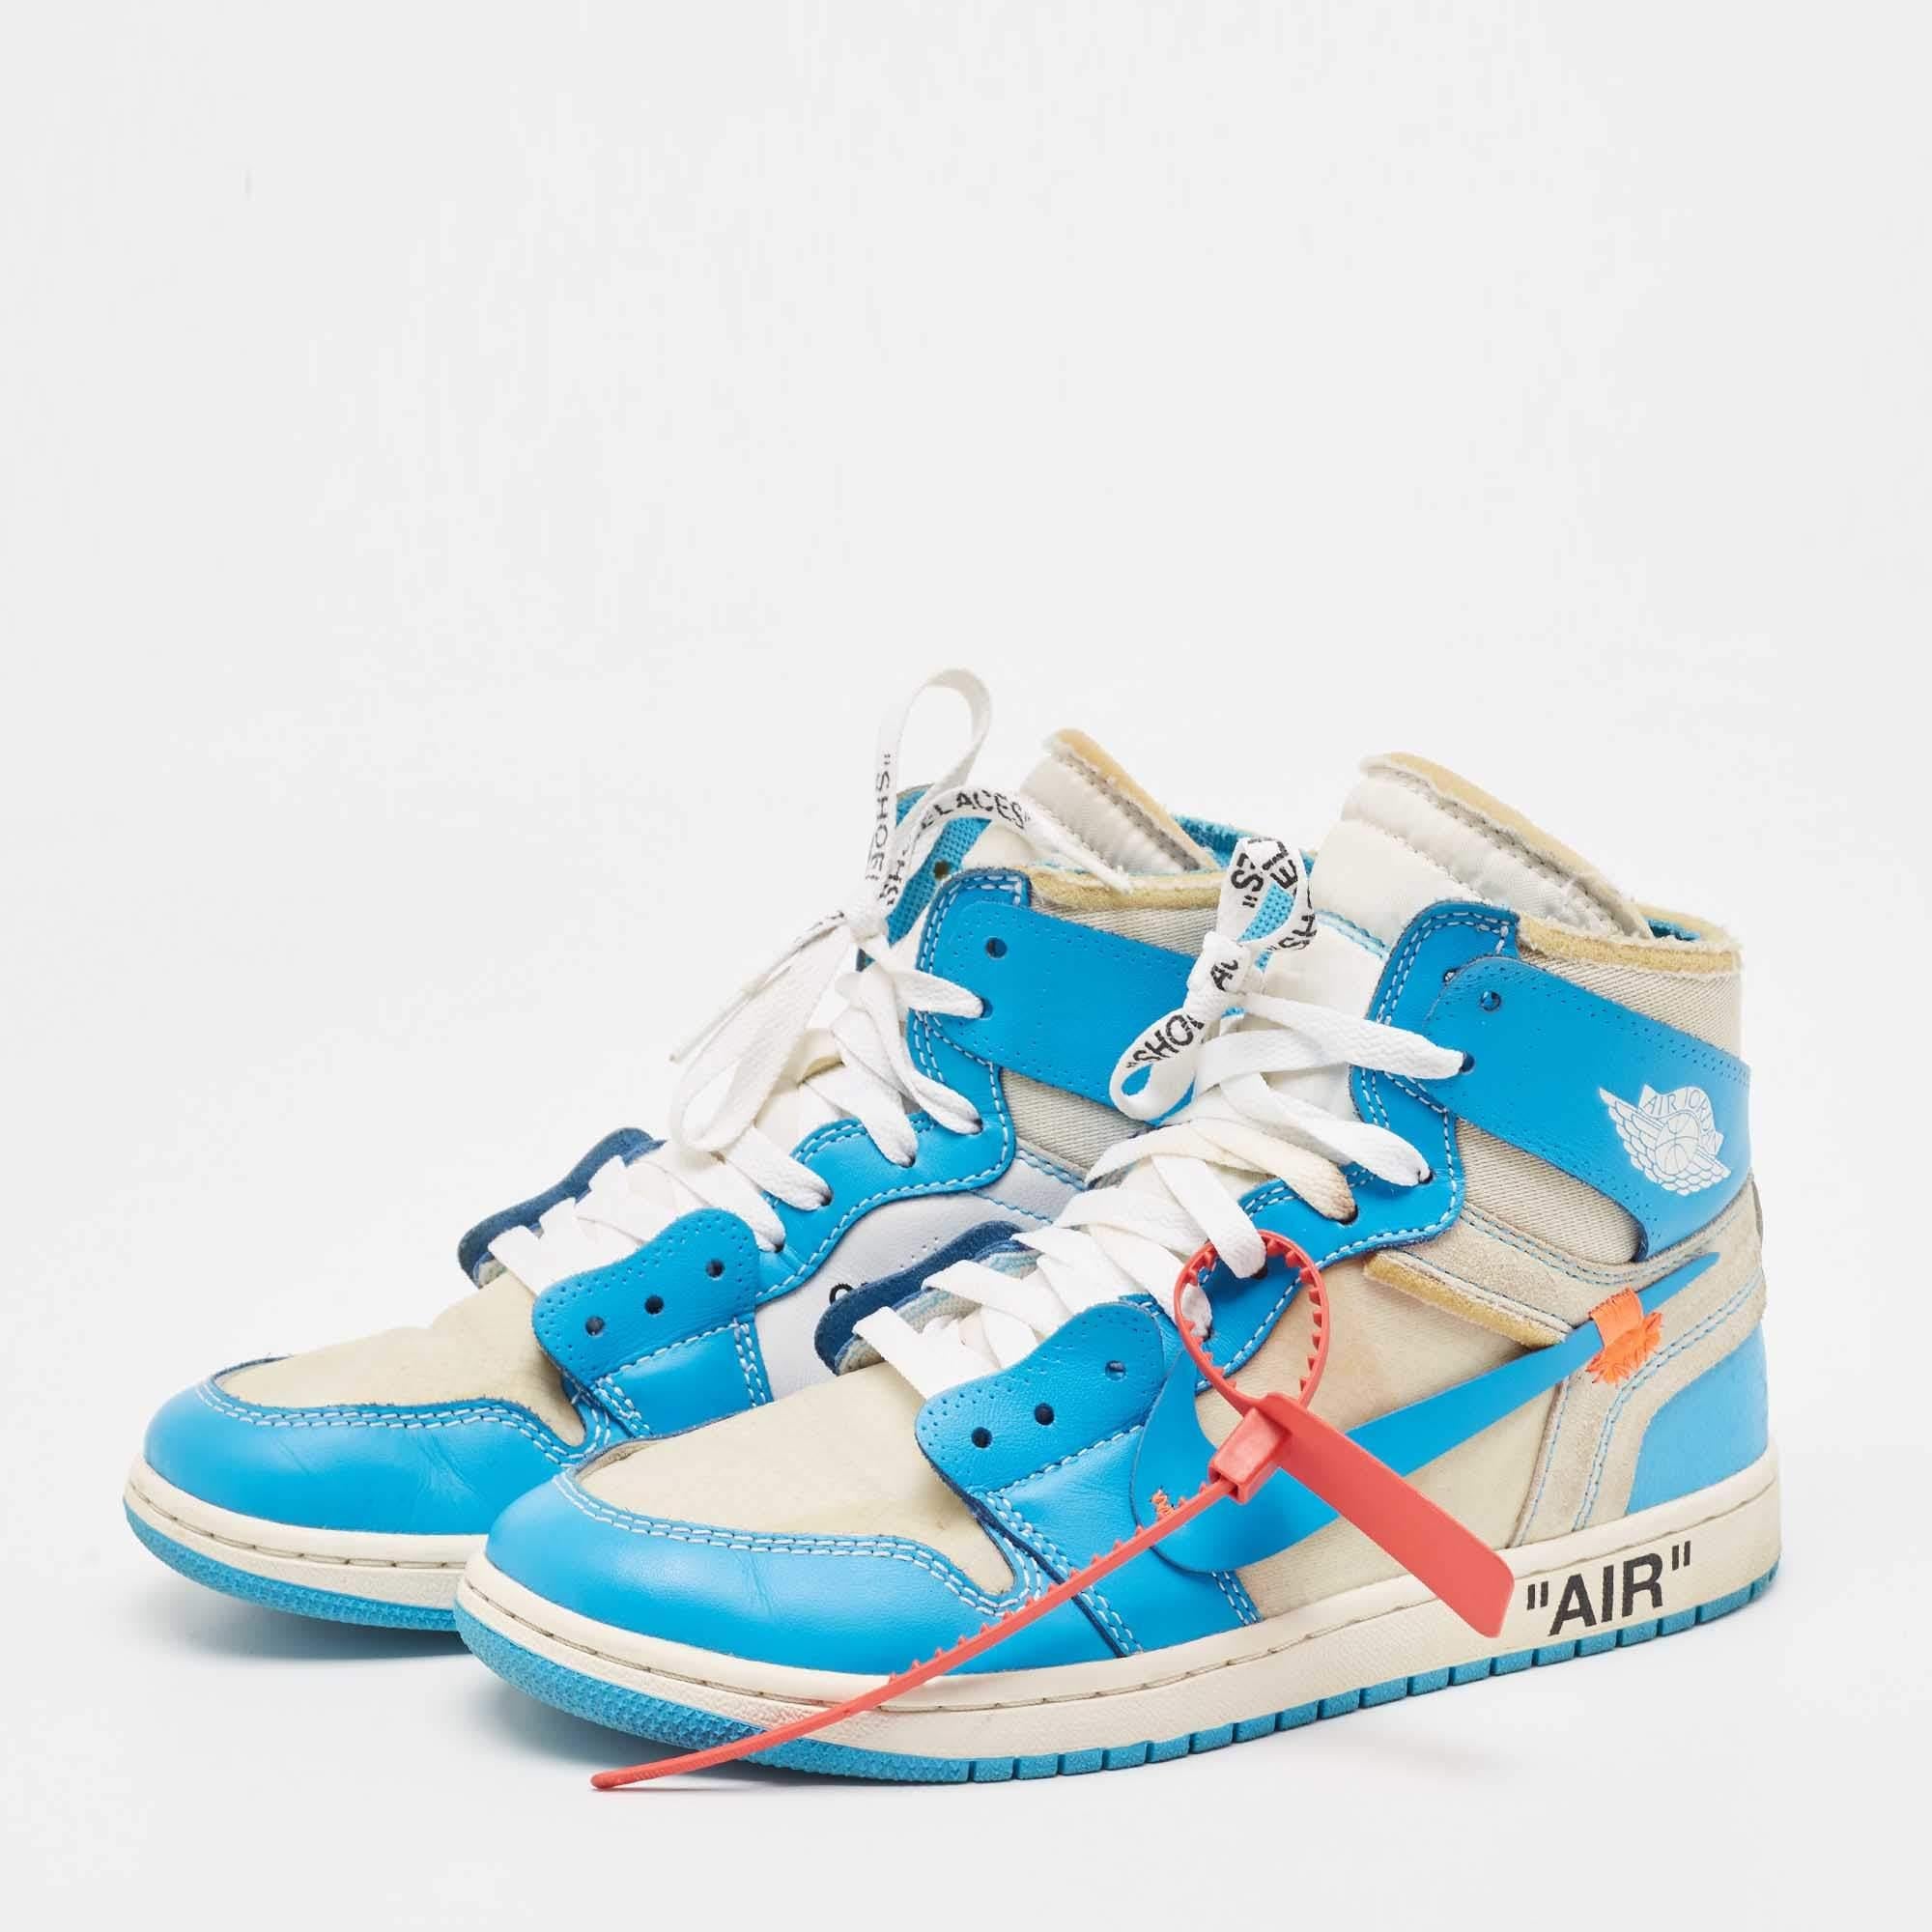 Off-White x Nike Blue/Grey Leather and Mesh Jordan 1 Retro High Sneakers Size 40 3